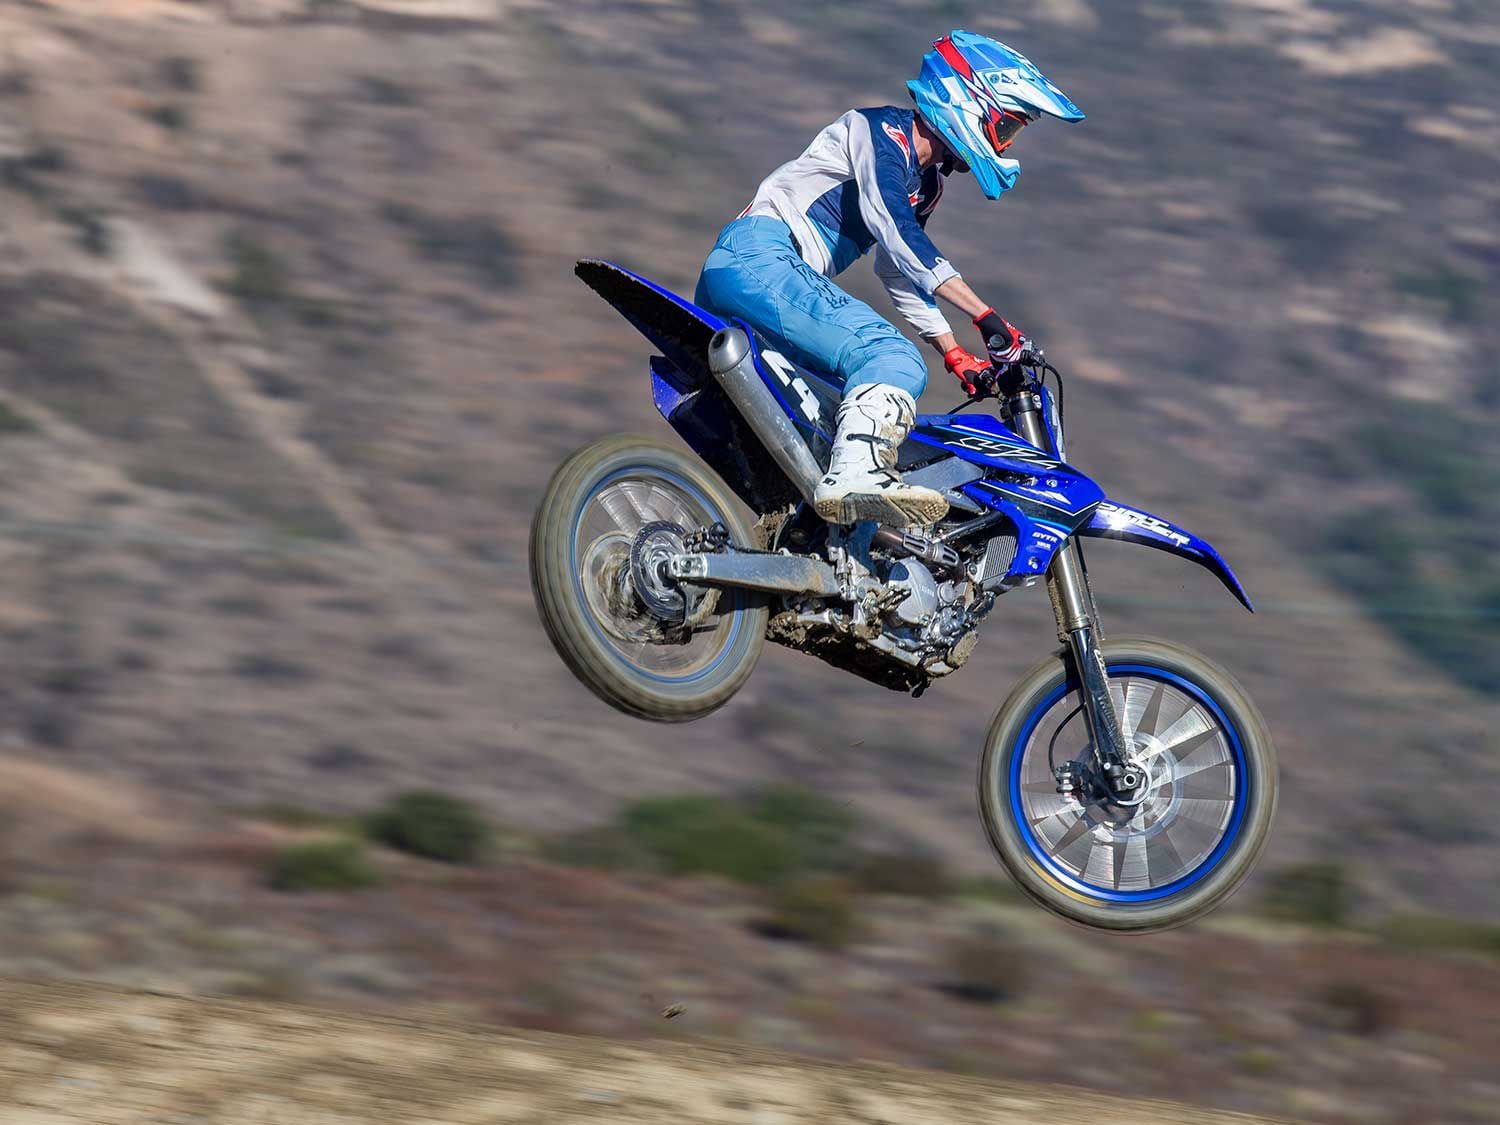 “The Yamaha is stable over bumps, down straightaways, and in corners. Also, the wheelbase feels short, which makes the bike easy to control and put it where you want it.” <em>—Tanner Basso</em>